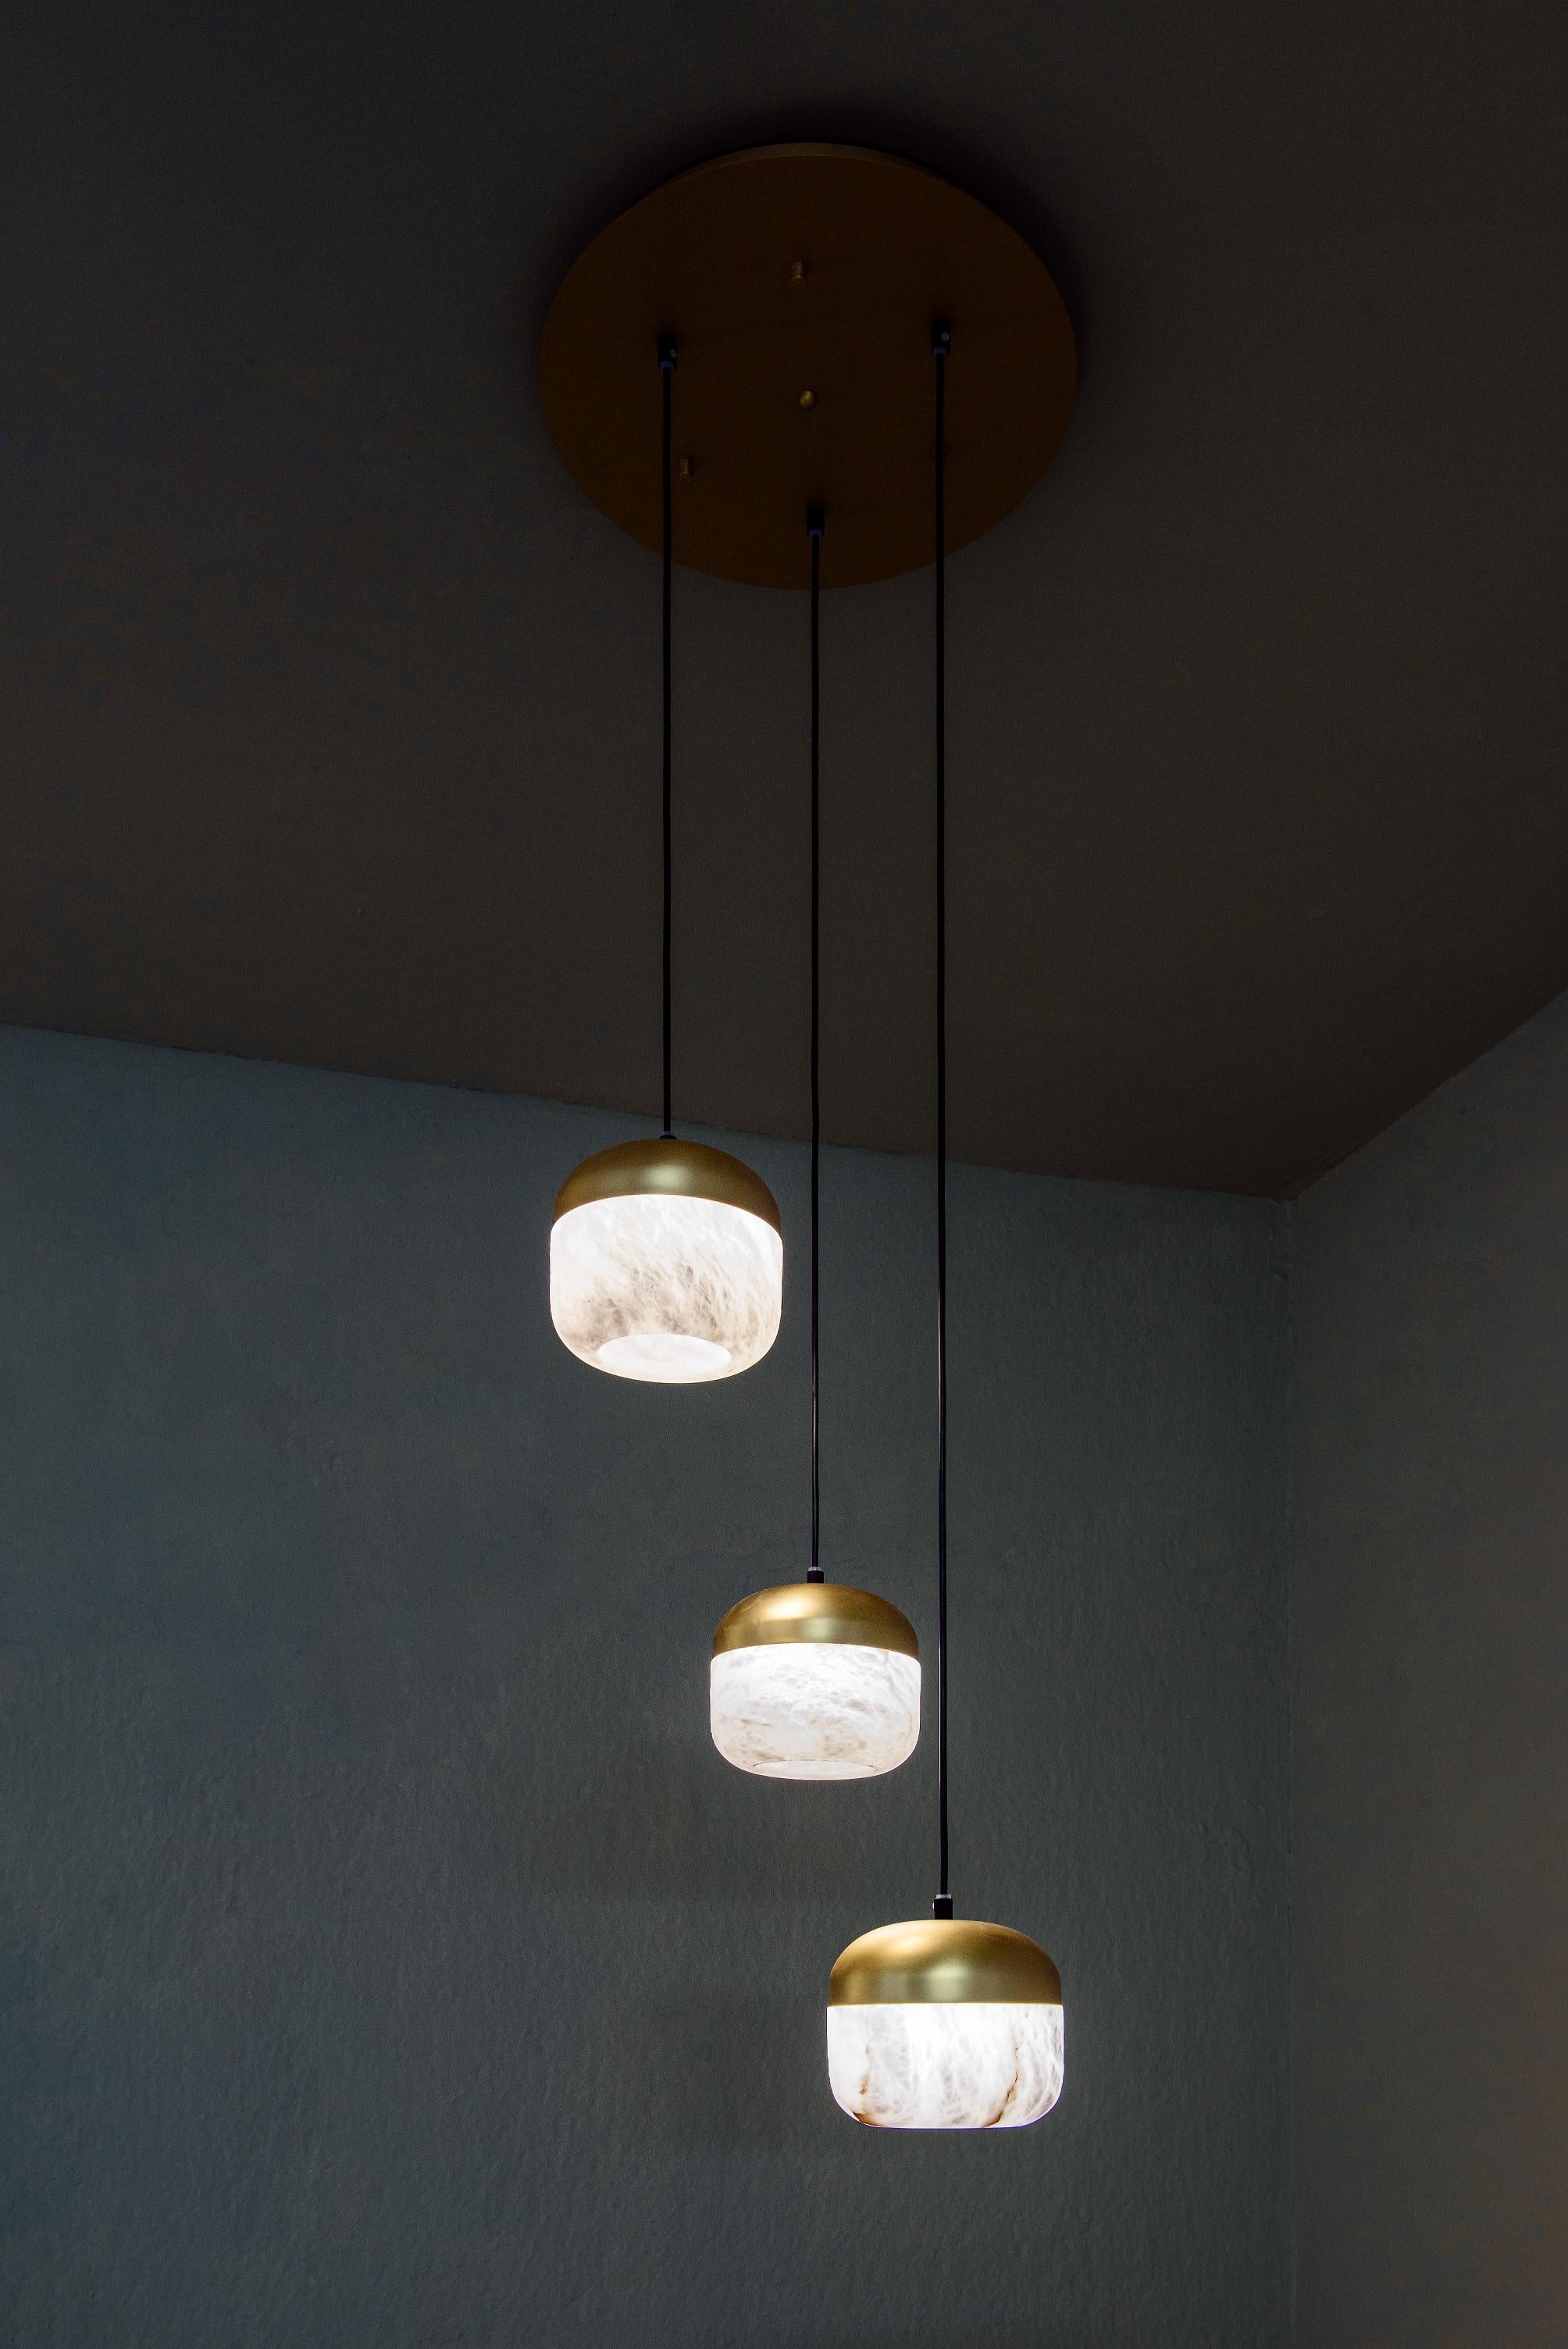 Copper 3 Pendant Lamp by United Alabaster
Dimensions: D 60 x H 180 cm
Materials: Alabaster, Copper (Satin Gold Finish)
Also Available: Black Nickel, Satin Copper finishes.

All our lamps can be wired according to each country. If sold to the USA it